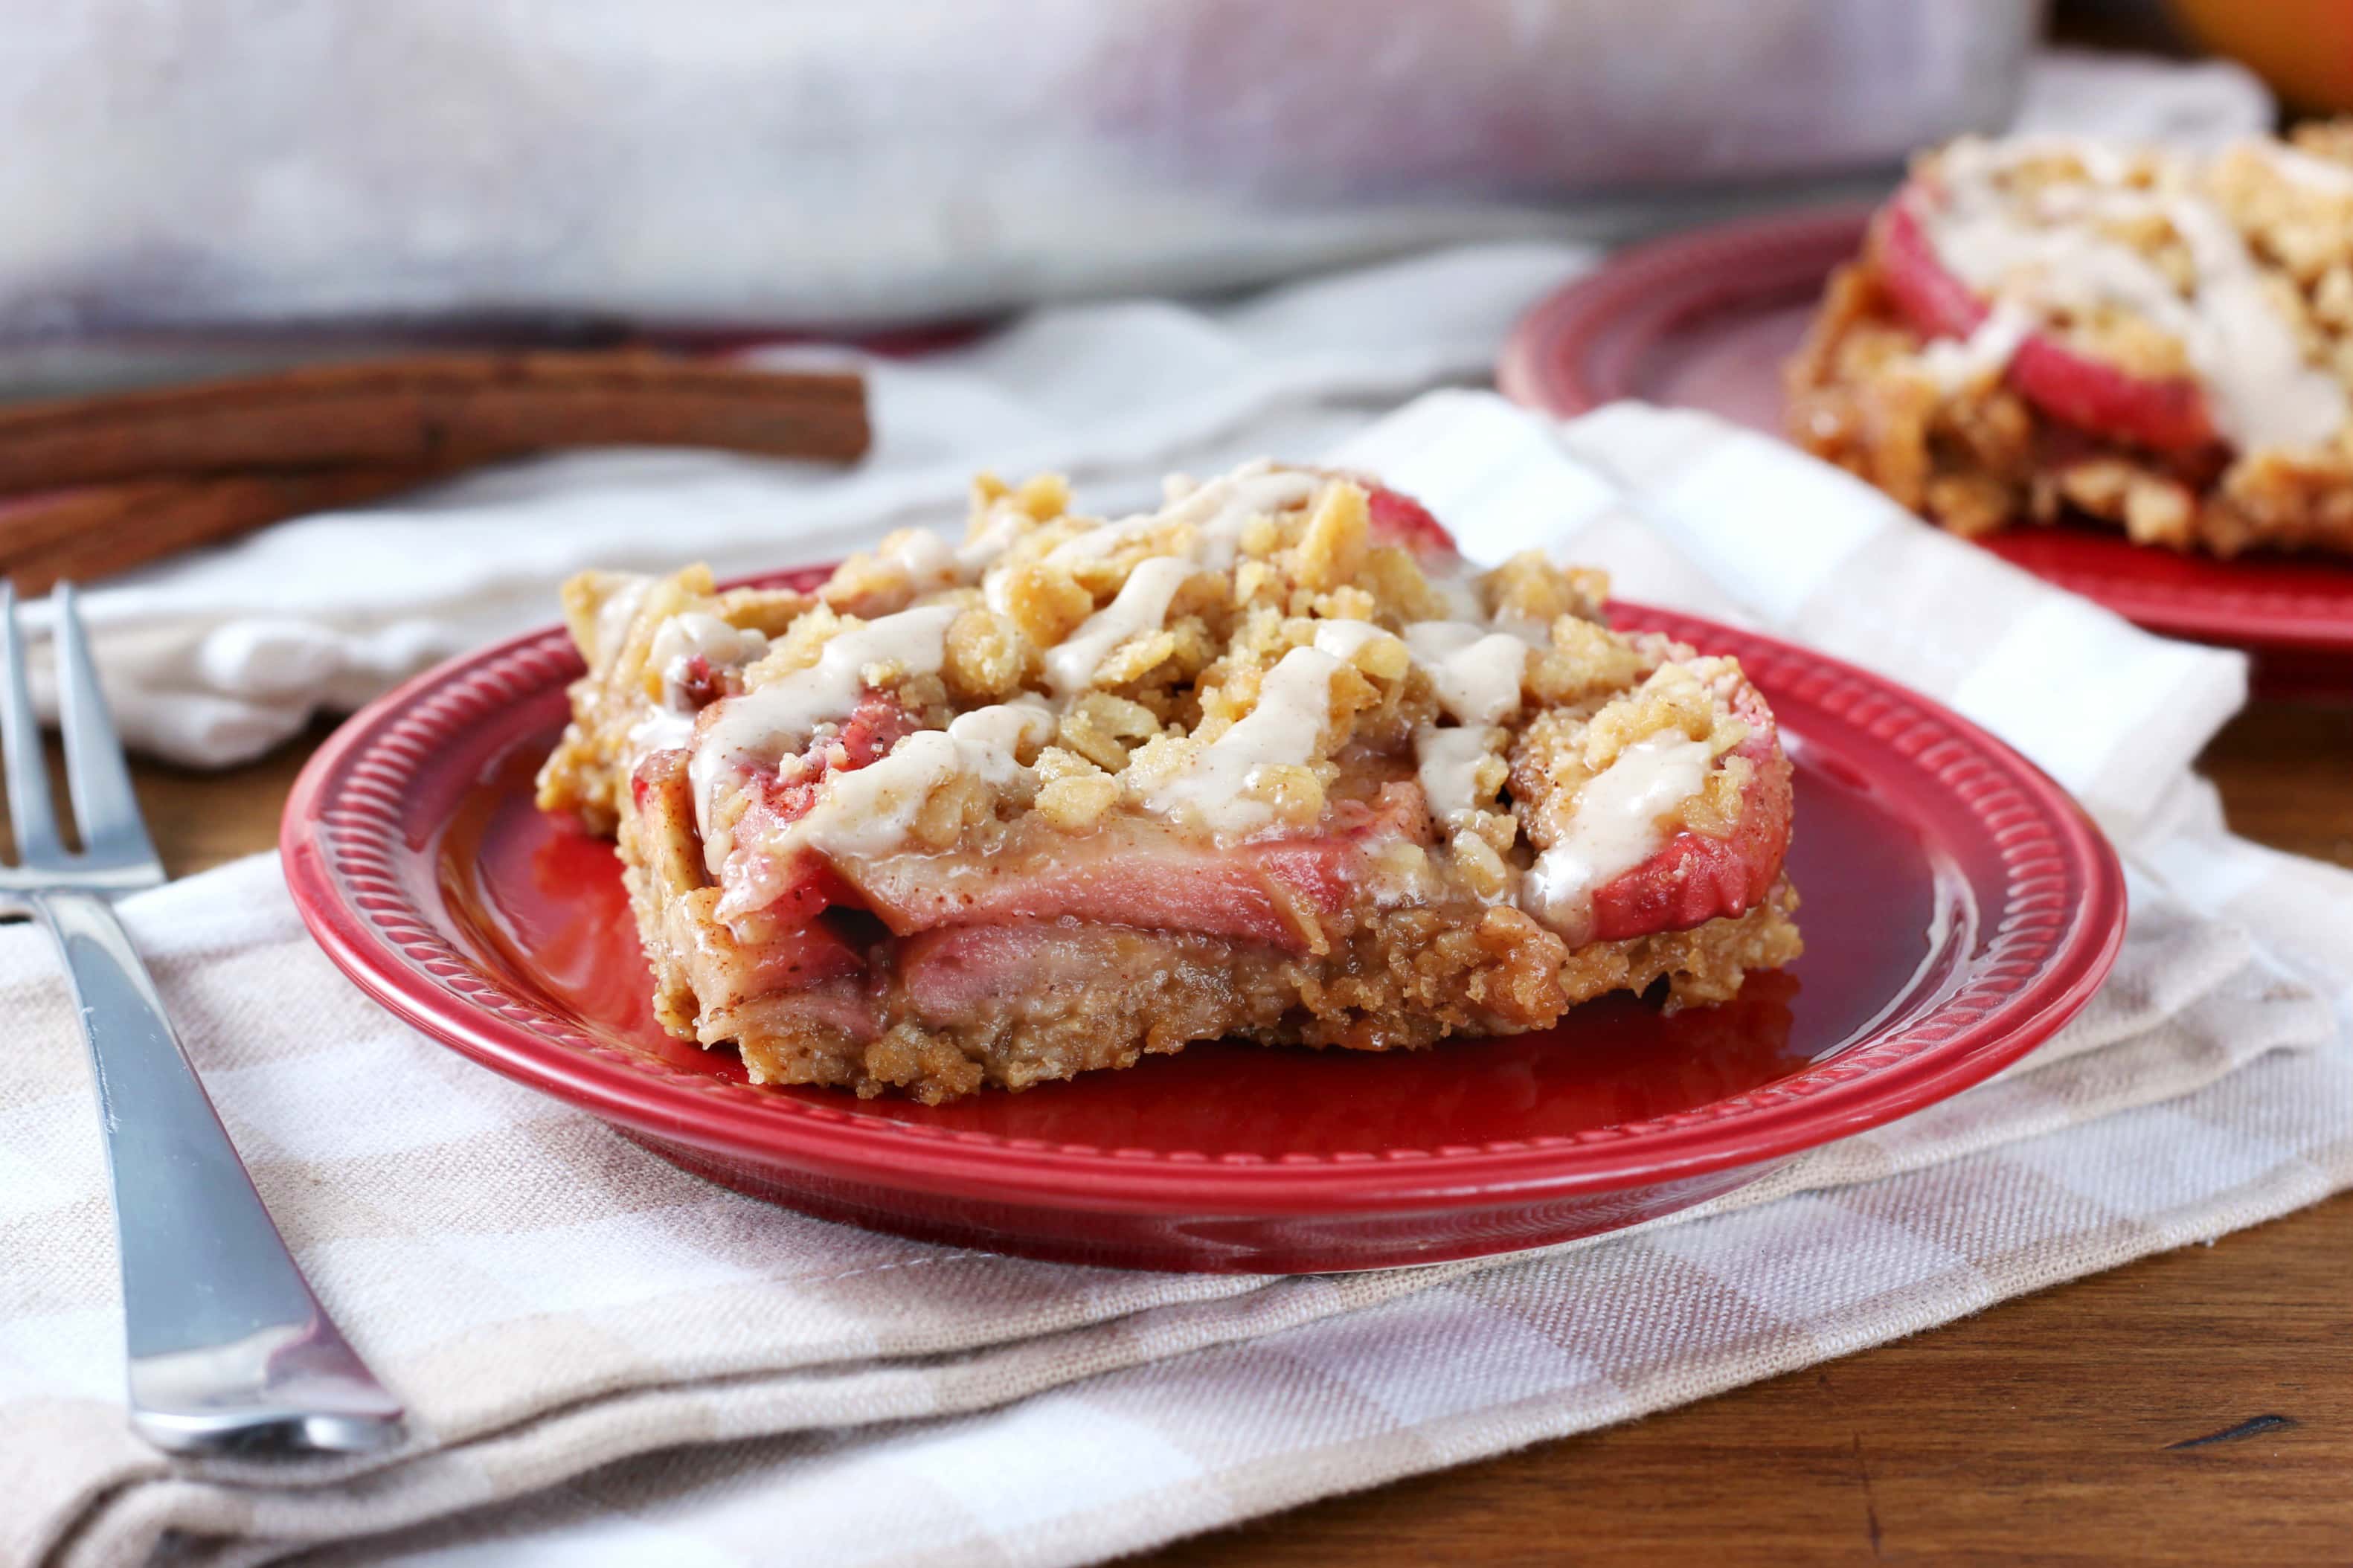 Peanut Butter Apple Crisp Bars with Maple Drizzle Recipe from A Kitchen Addiction